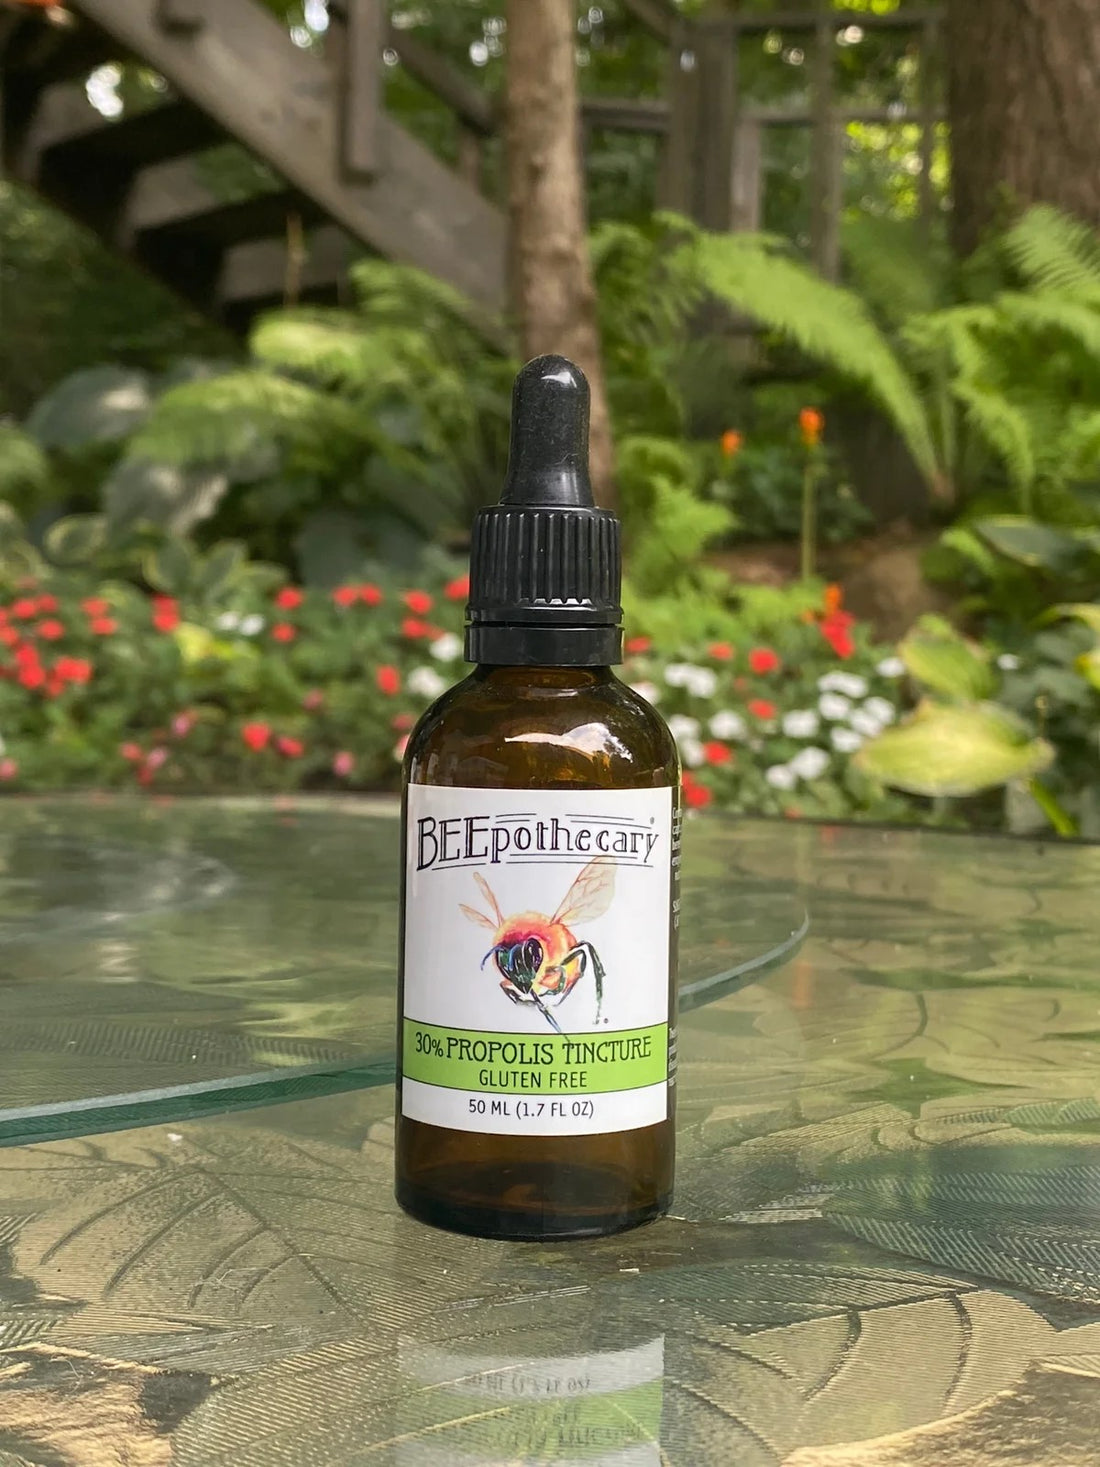 BEEpothecary 30% Propolis Tincture Gluten Free in 50 ml bottle with dropper